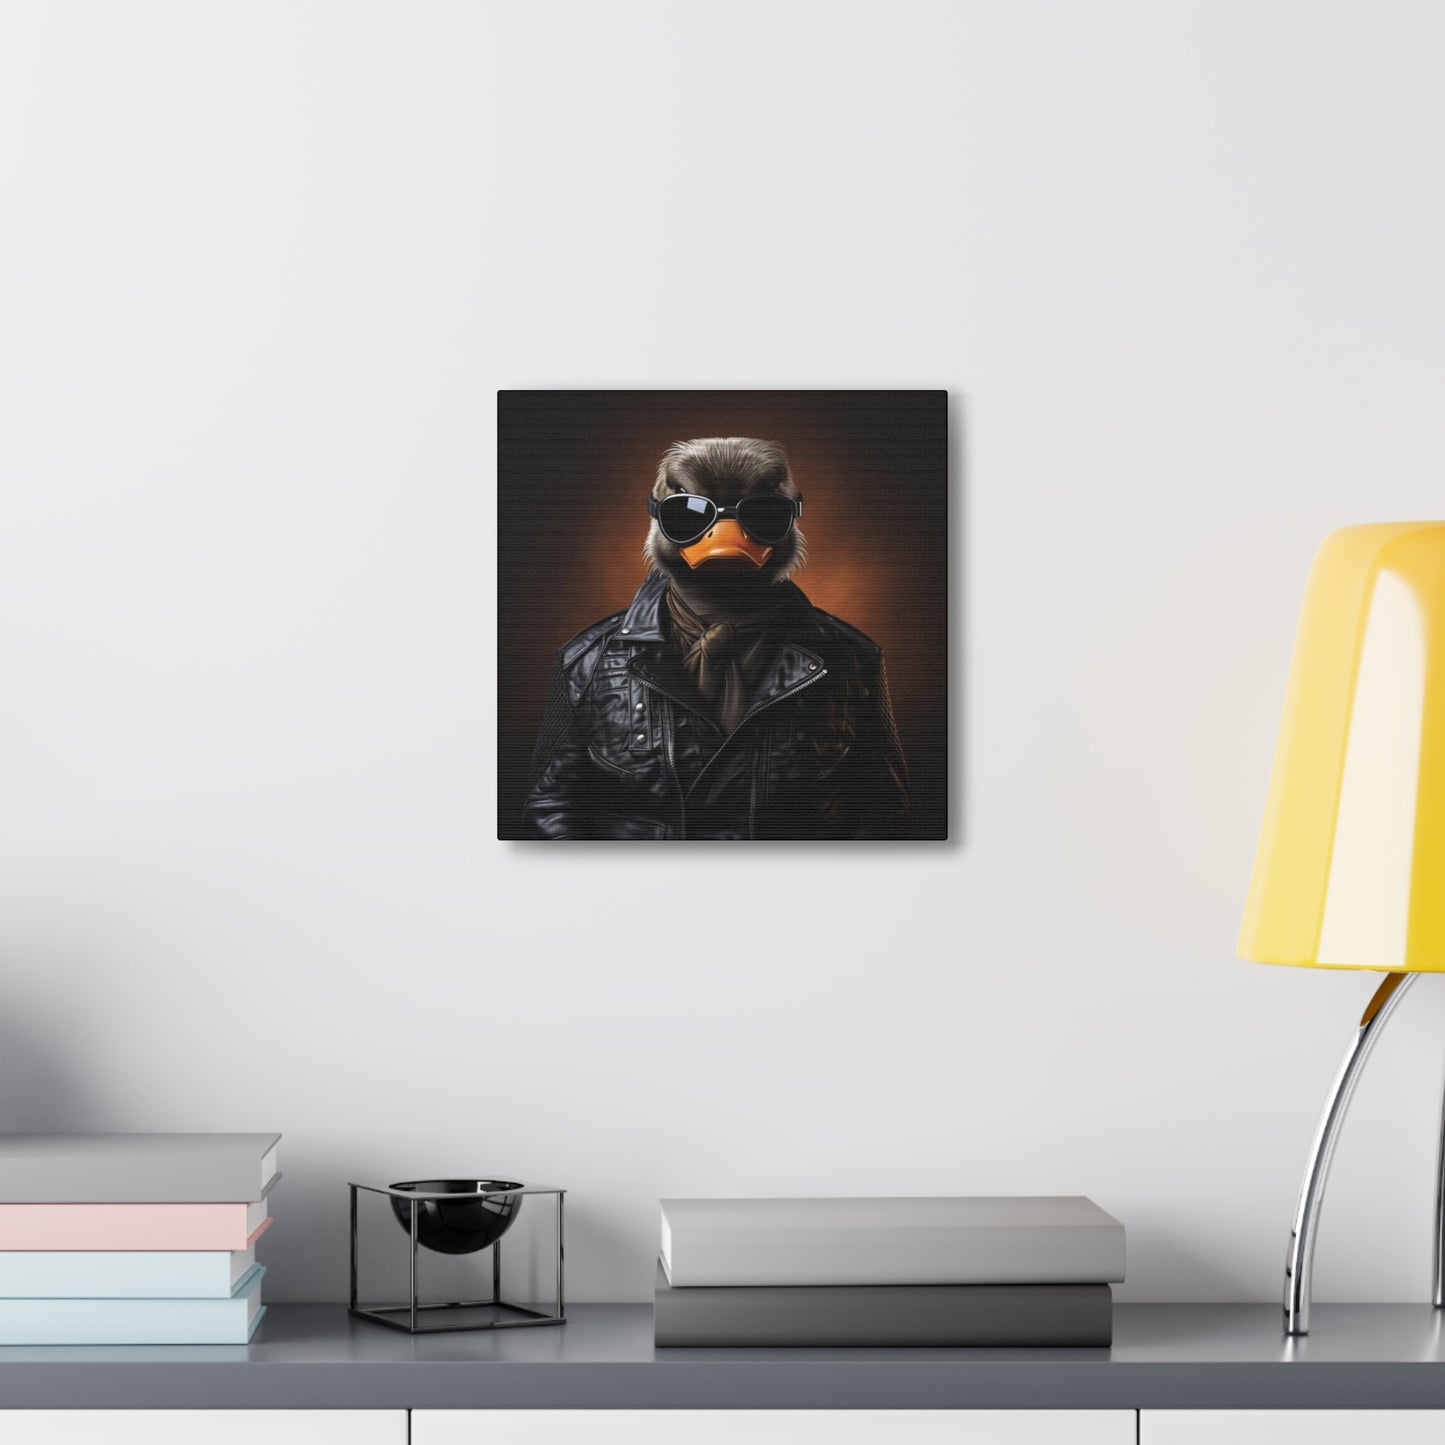 Duck Leather | Canvas Gallery Wrap | Wall Art